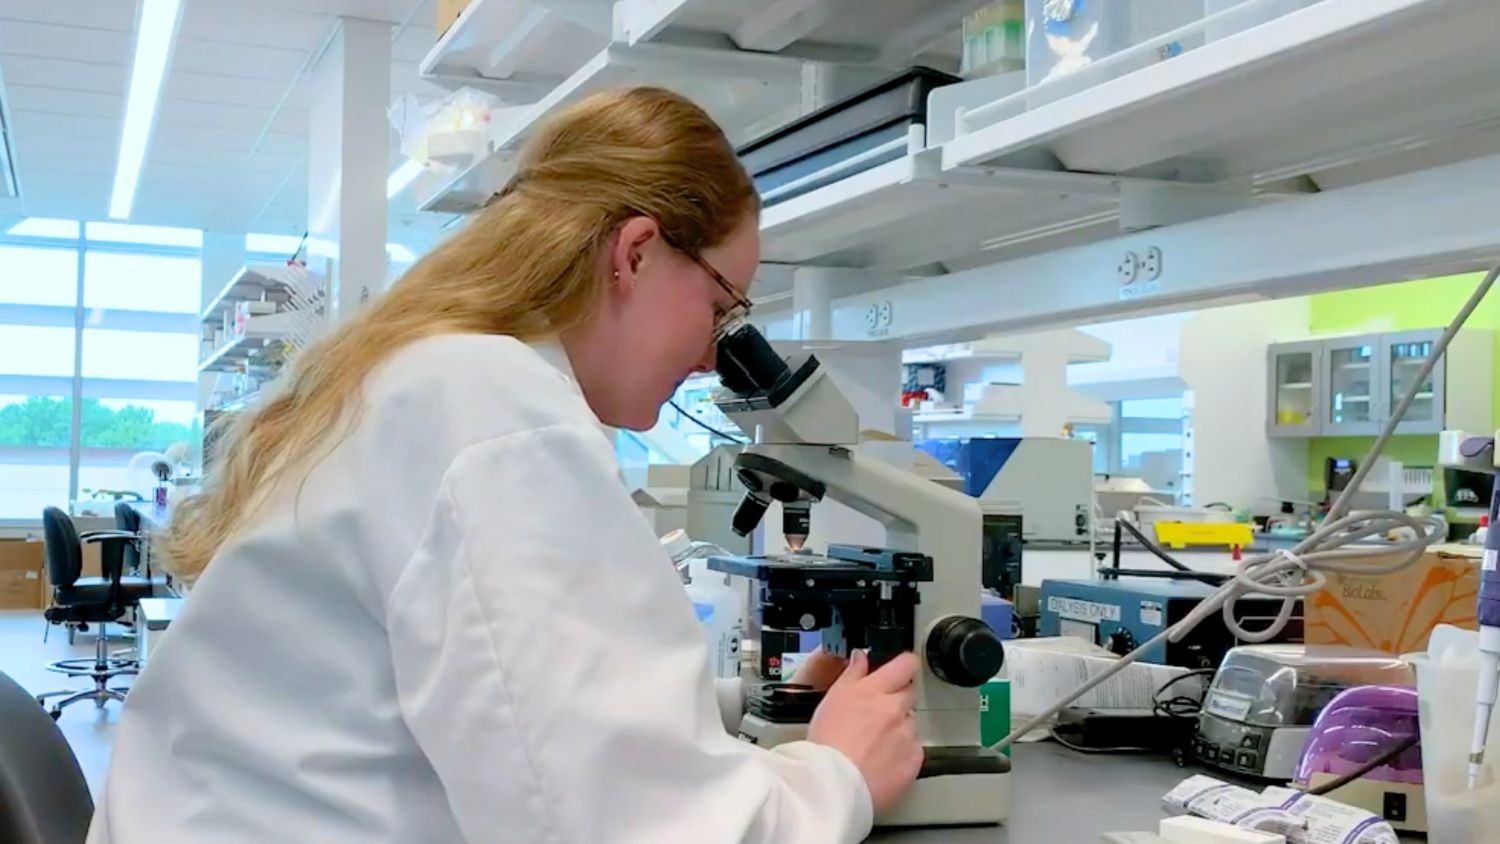 Micaela Robson wearing a white lab coat looking into a microscope